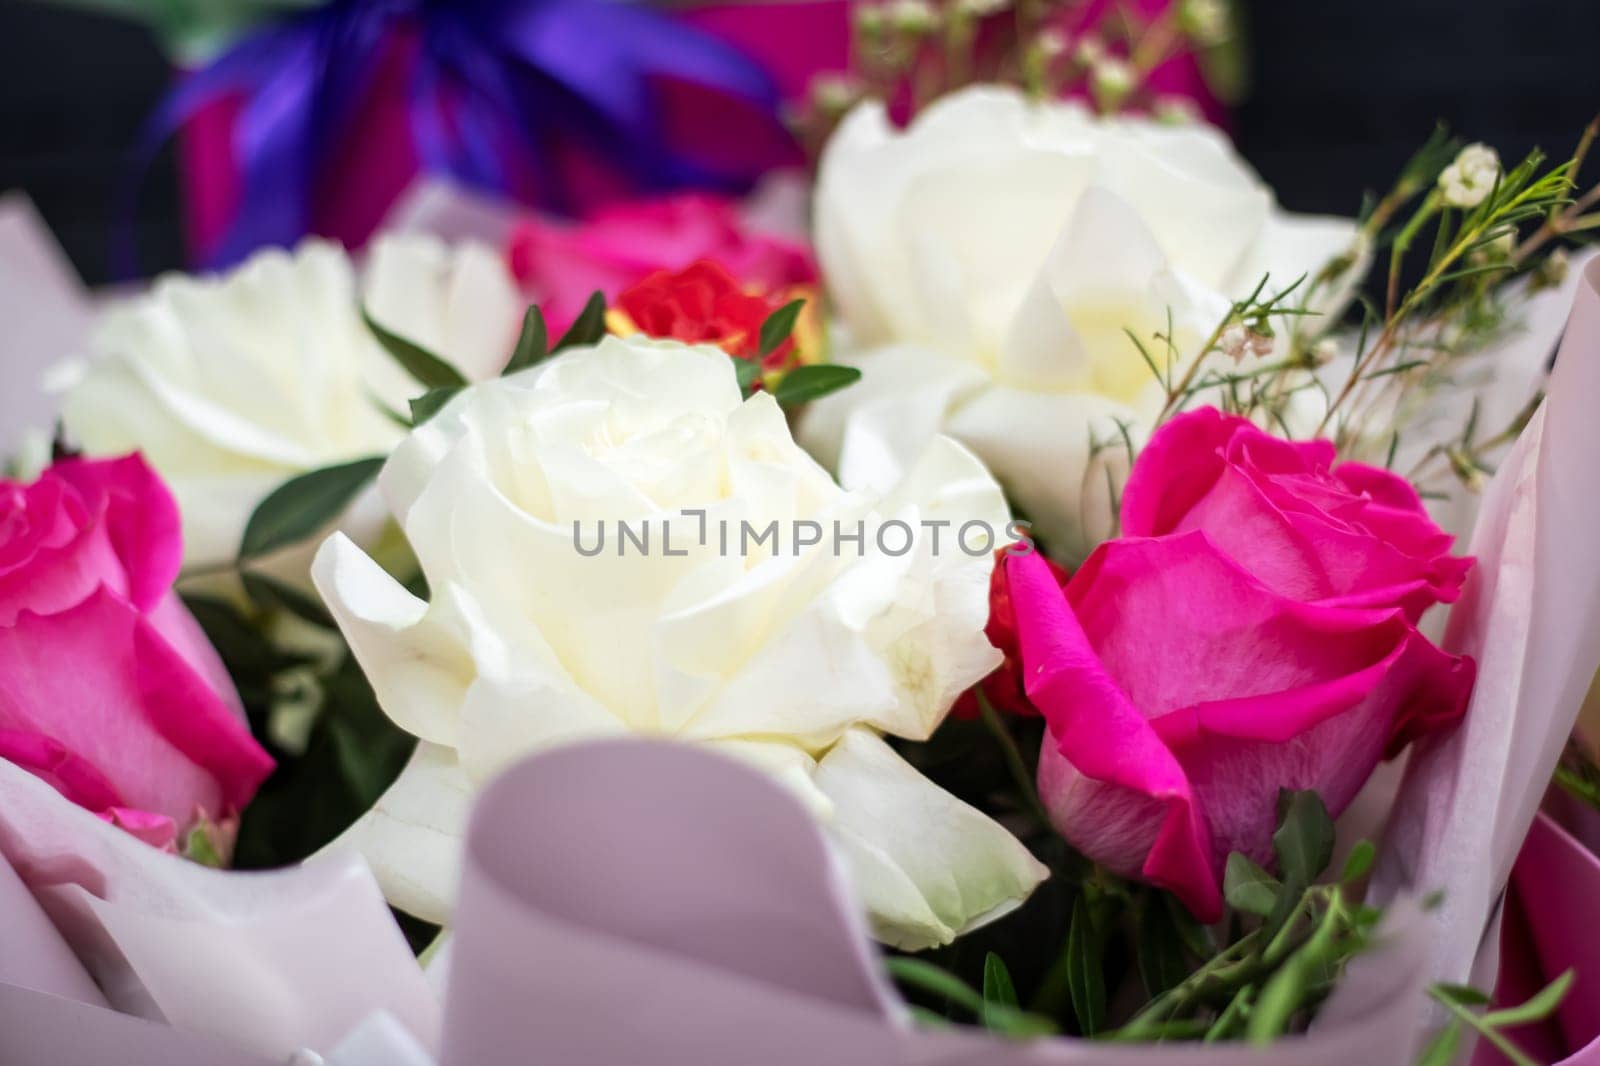 A beautiful arrangement of white and pink roses elegantly presented in pink wrapping paper, perfect for any occasion that calls for a touch of natural beauty